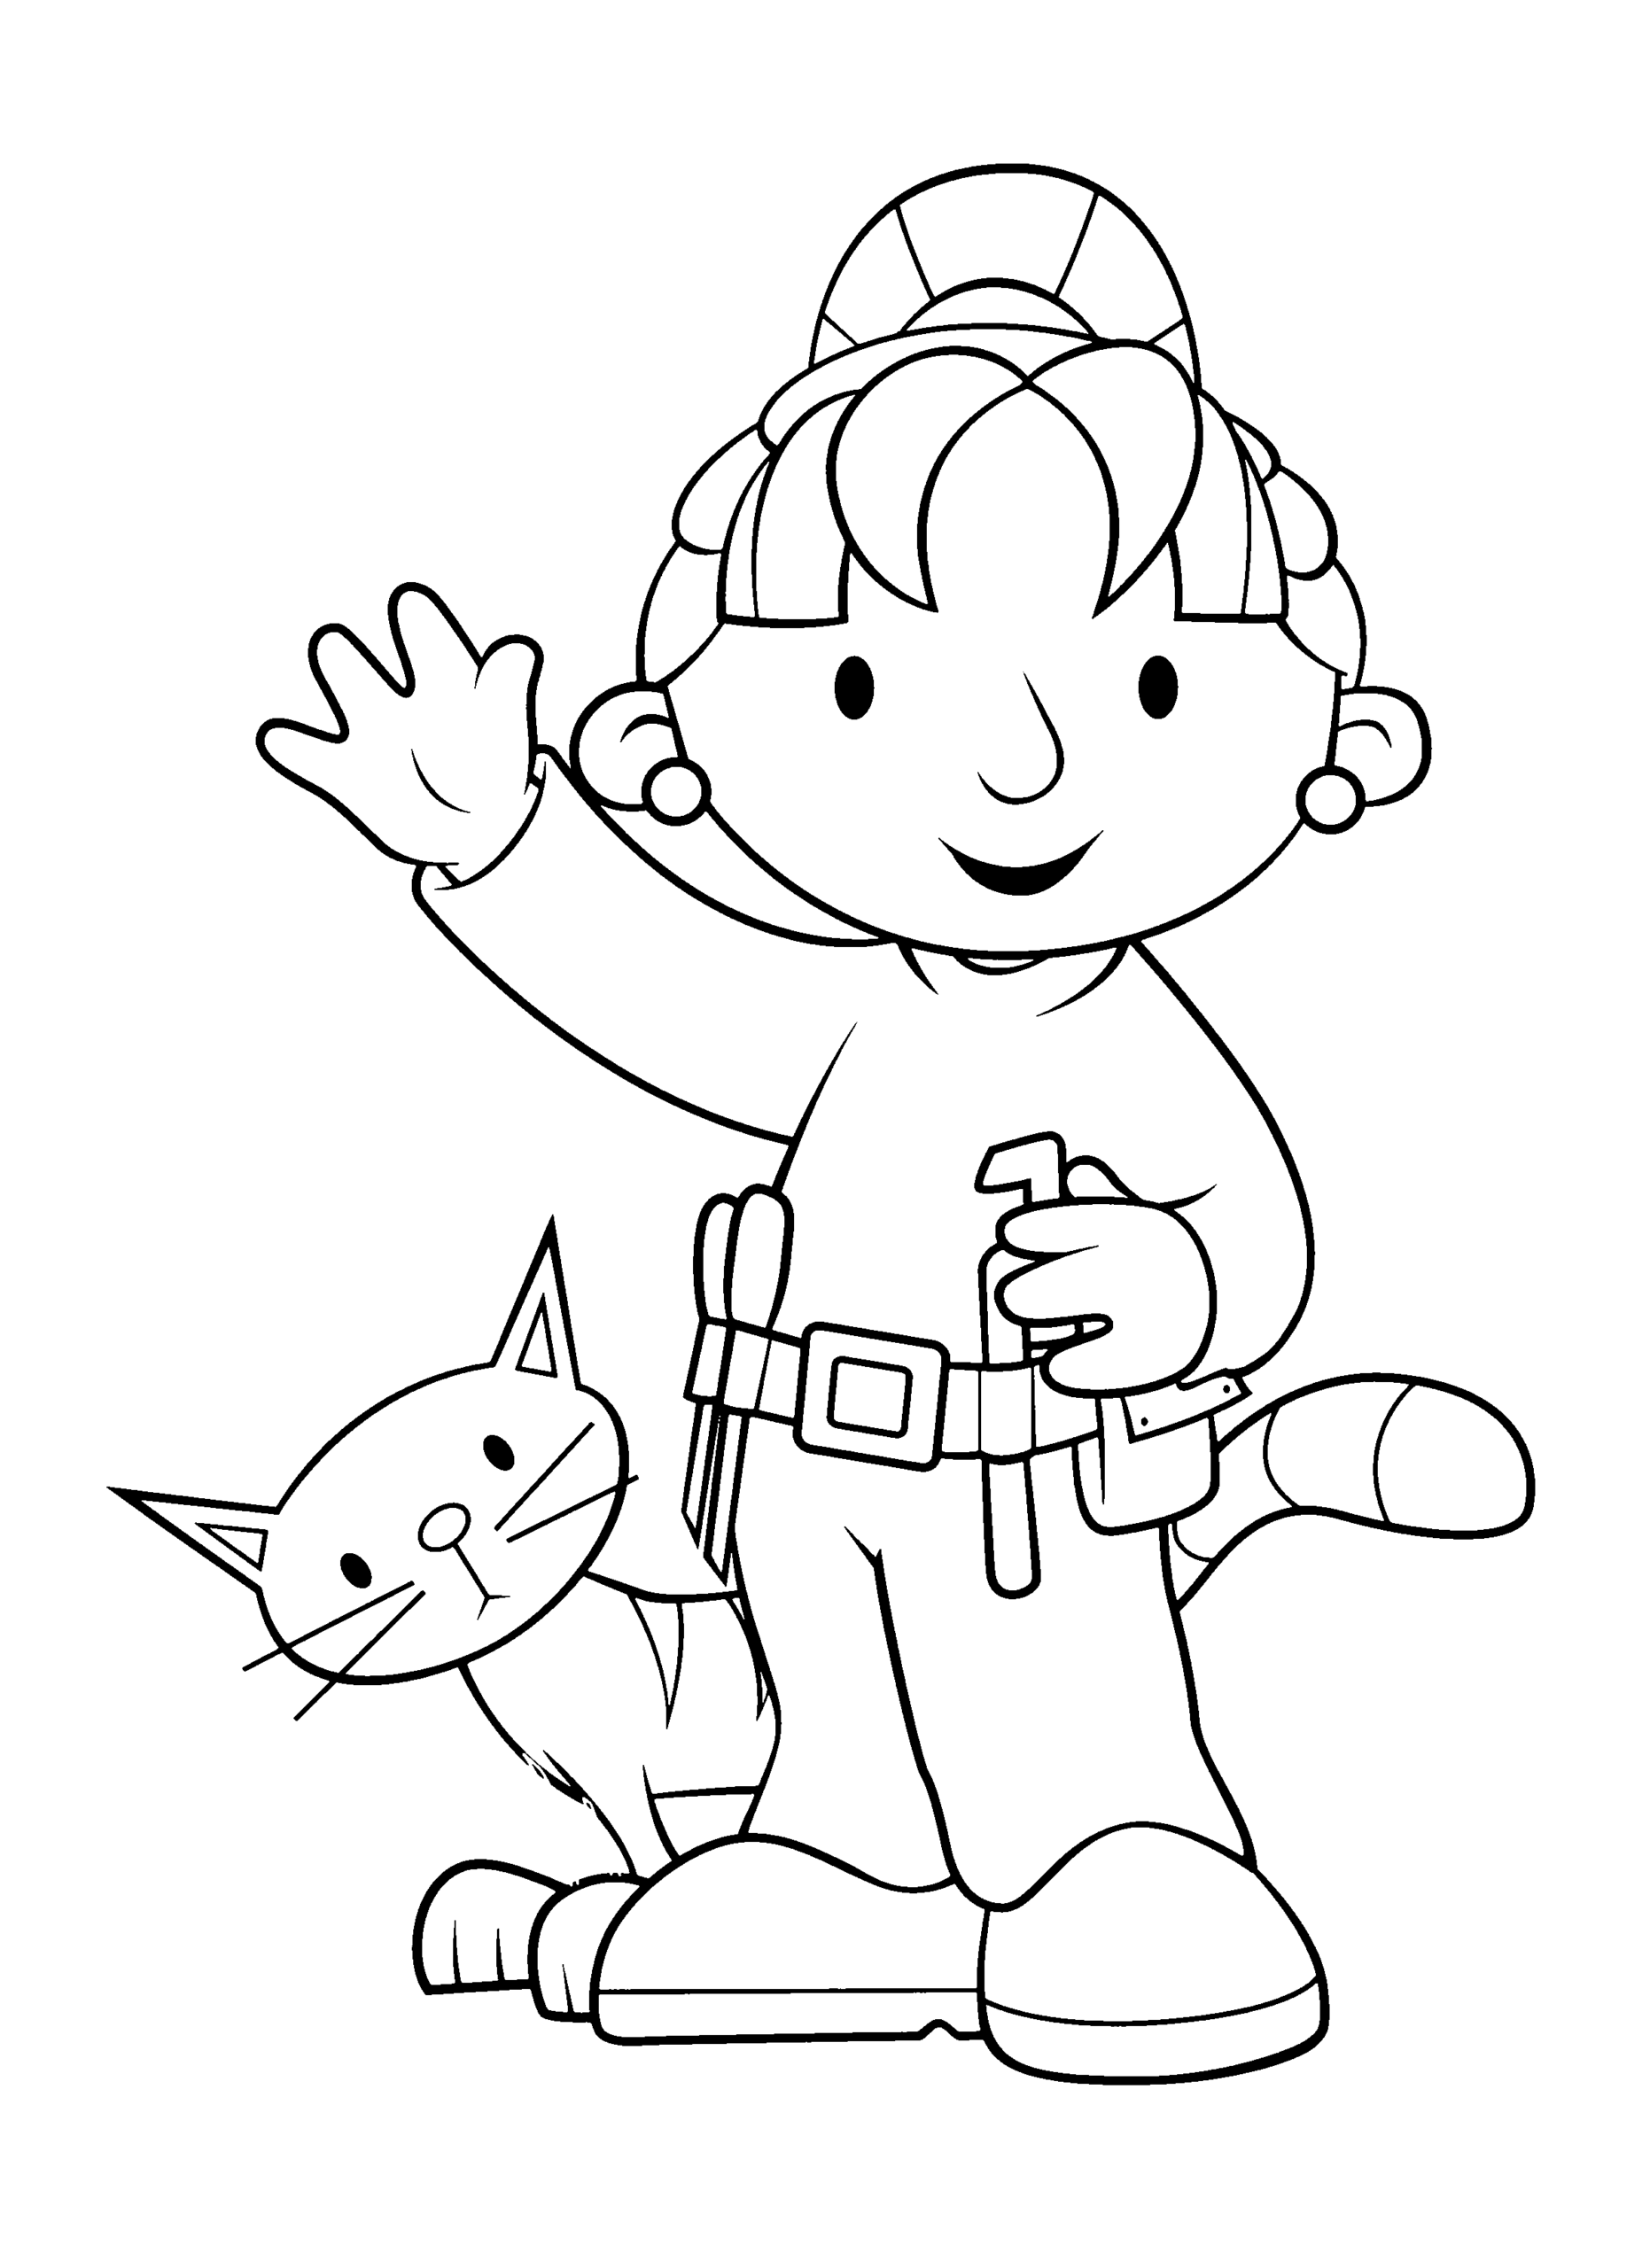 Bob the Builder Coloring Pages TV Film bob the builder 4 Printable 2020 01058 Coloring4free